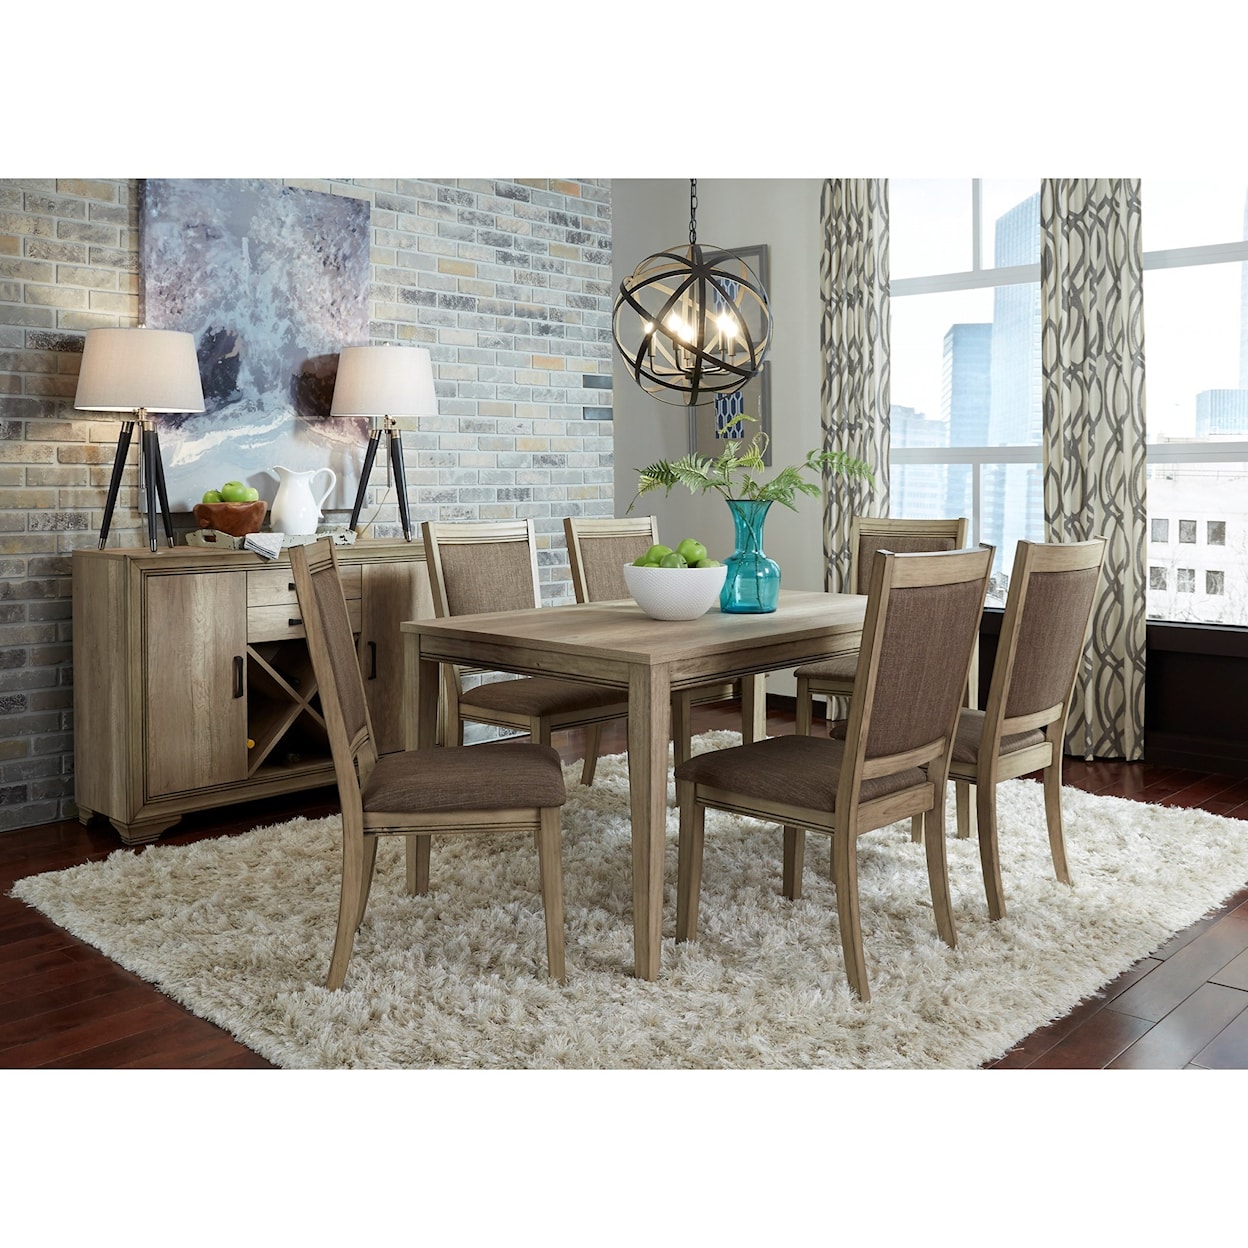 Libby Sun Valley 8-Piece Dining Room Group